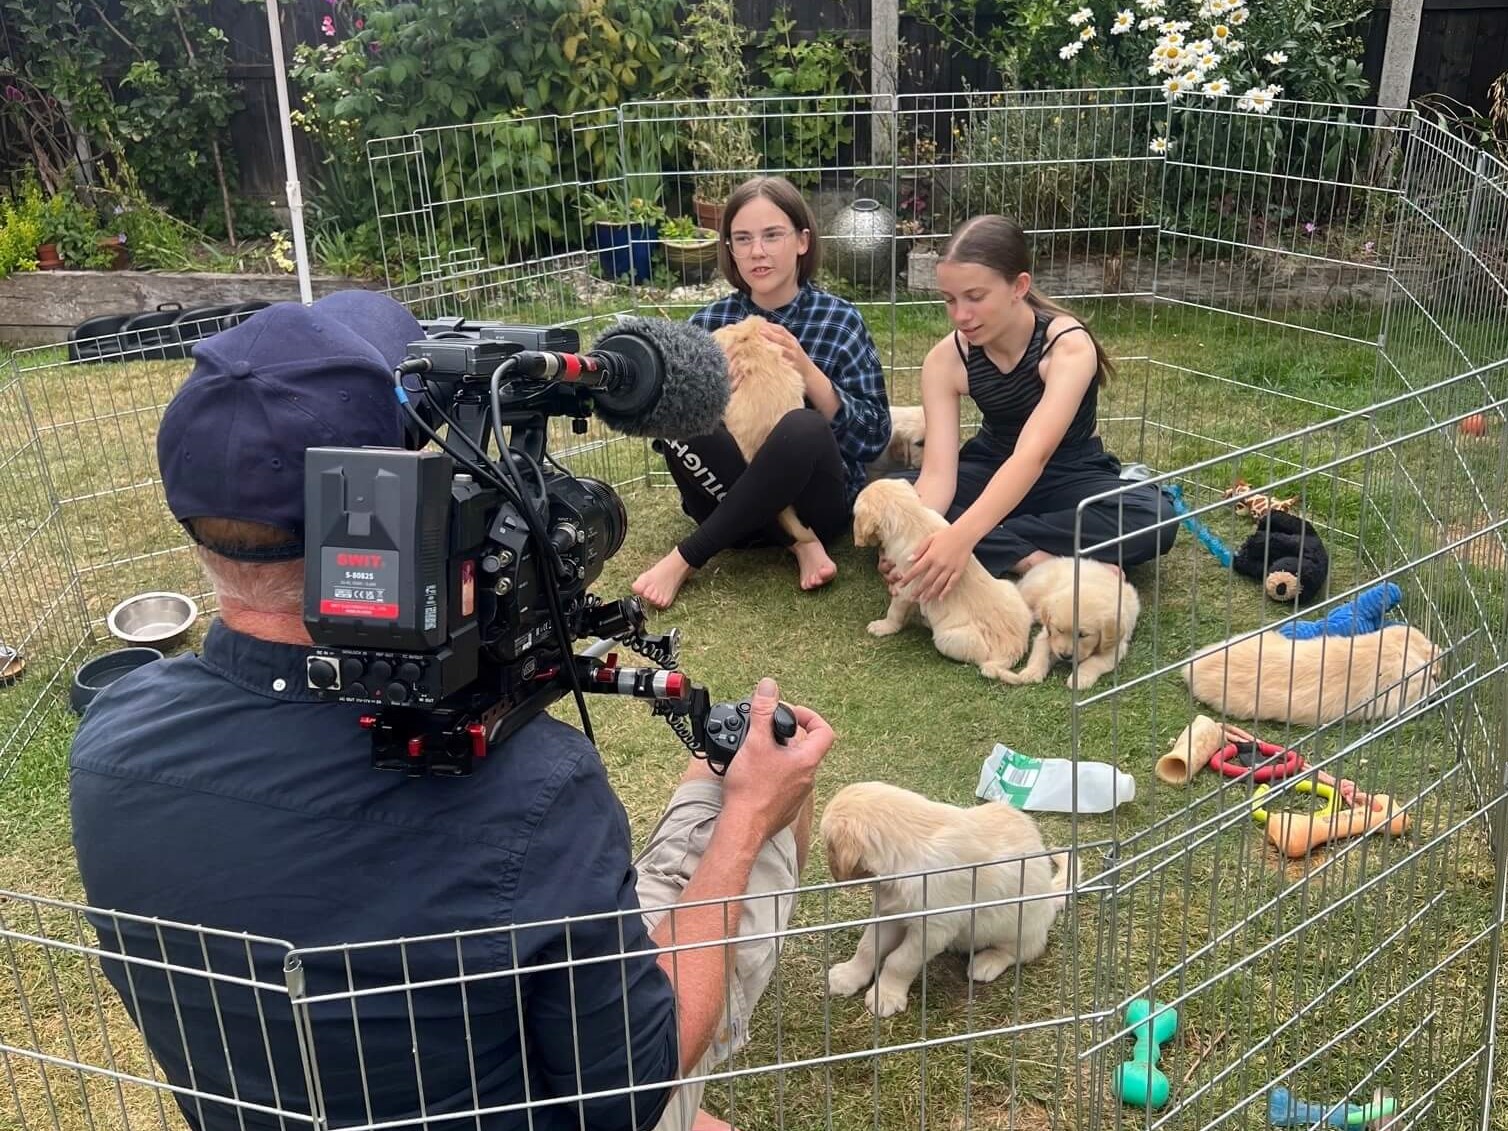 Two girls play with a litter of young golden retriever puppies in a garden play pen. They are being filmed by a cameraman.